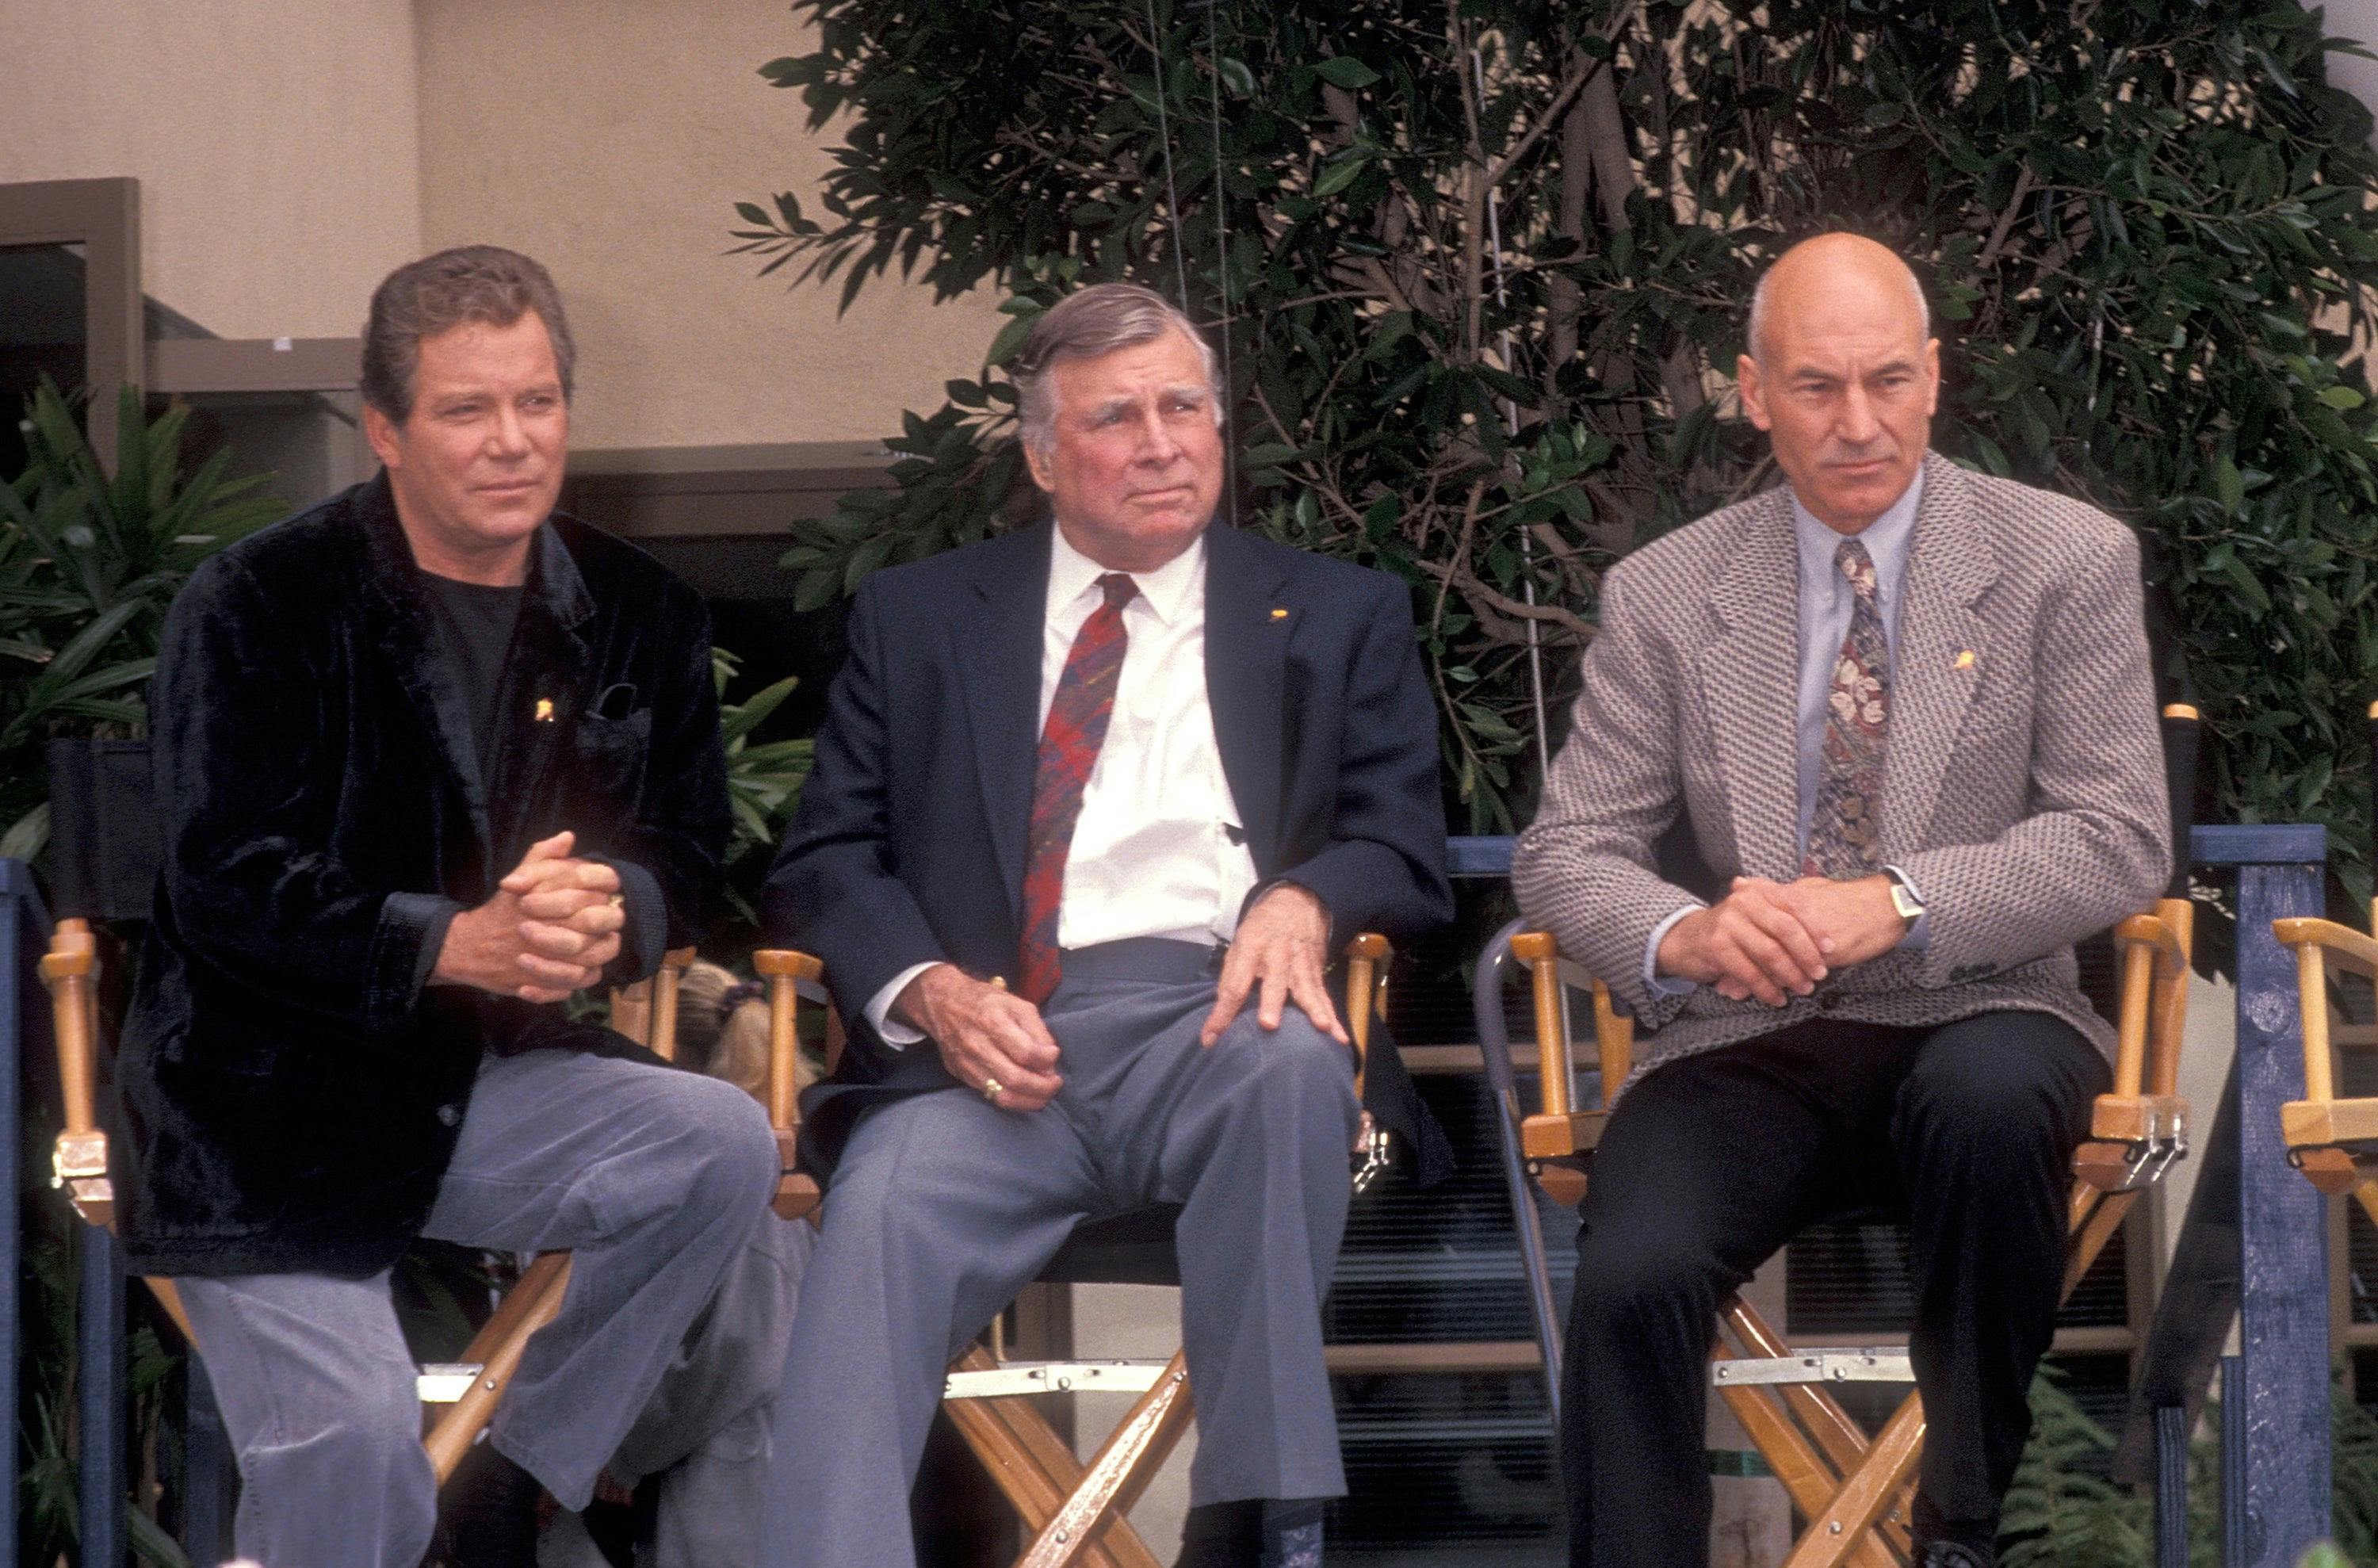 Actor William Shatner, producer Gene Roddenberry and actor Patrick Stewart attend the 